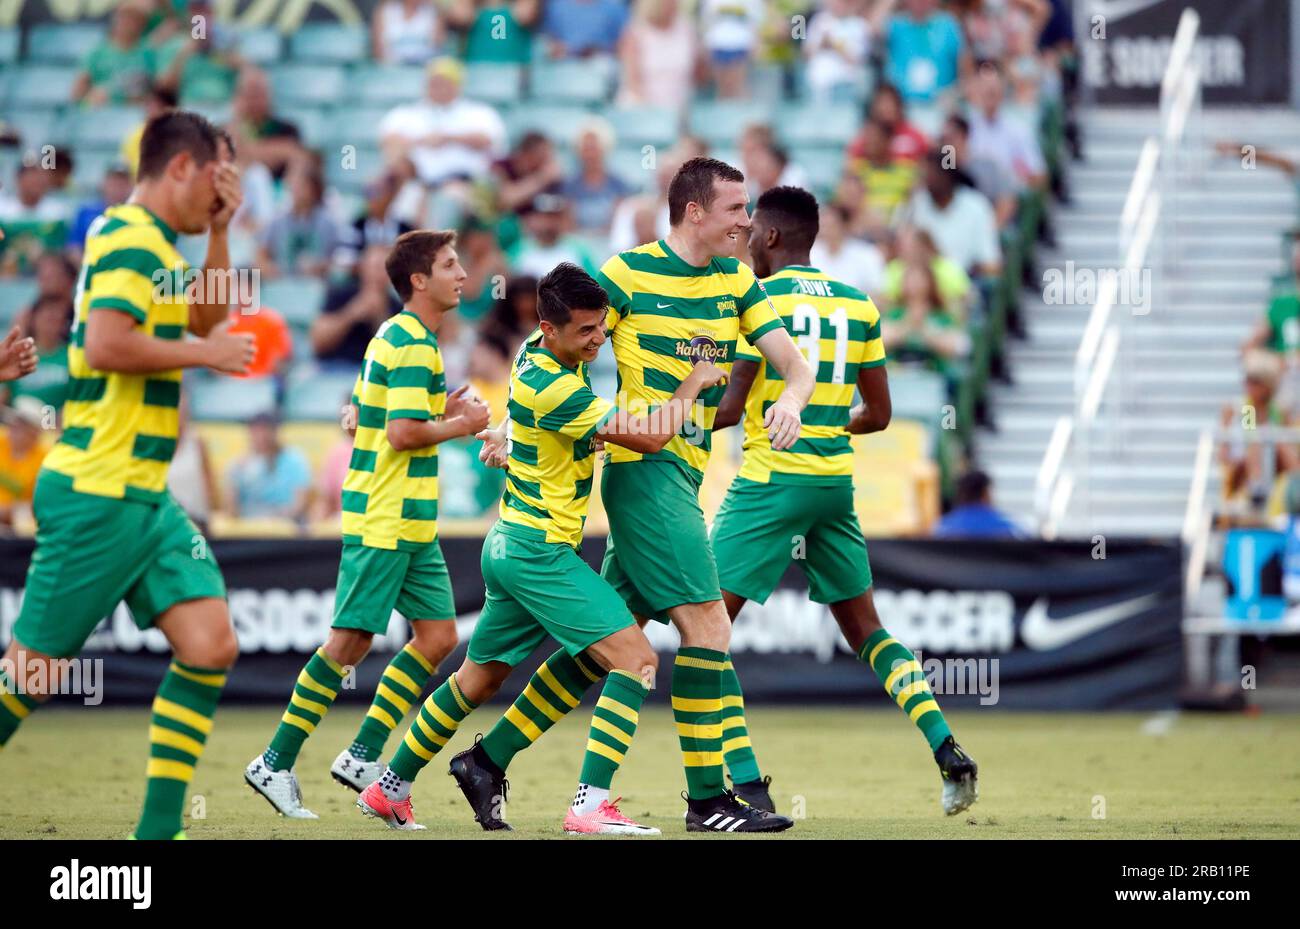 AUGUST 5, 2017 - ST. PETERSBURG, FLORIDA: Neill Collins celebrates during the Tampa Bay Rowdies match against the Harrisburg City Islanders at Al Lang Field. Collins was named the Head Coach at Barnsley F.C. on July 6, 2023. Stock Photo